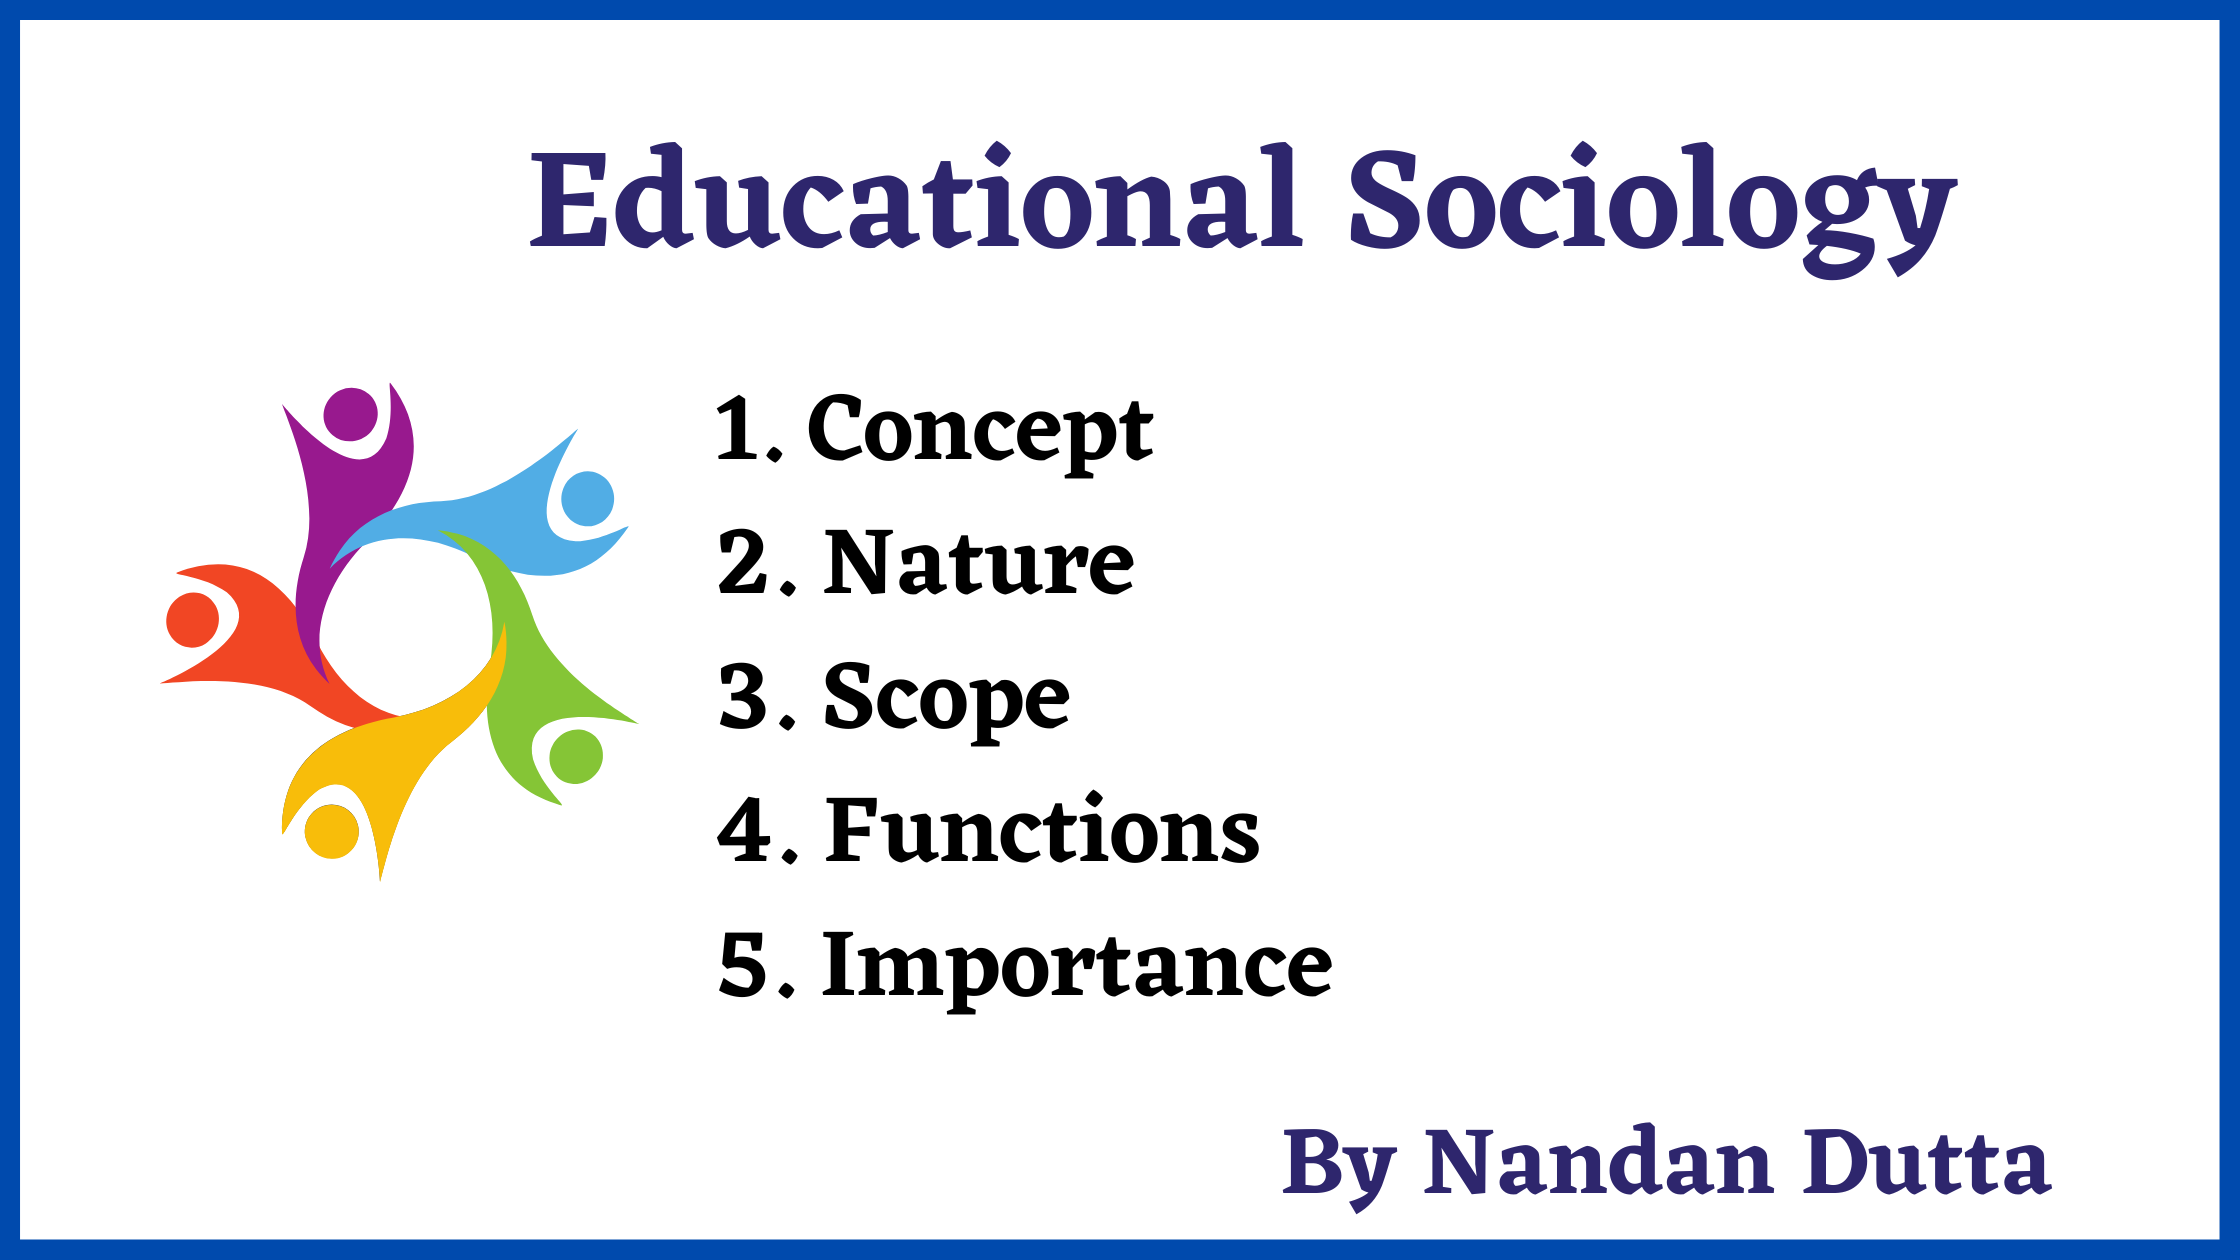 research topics for sociology of education